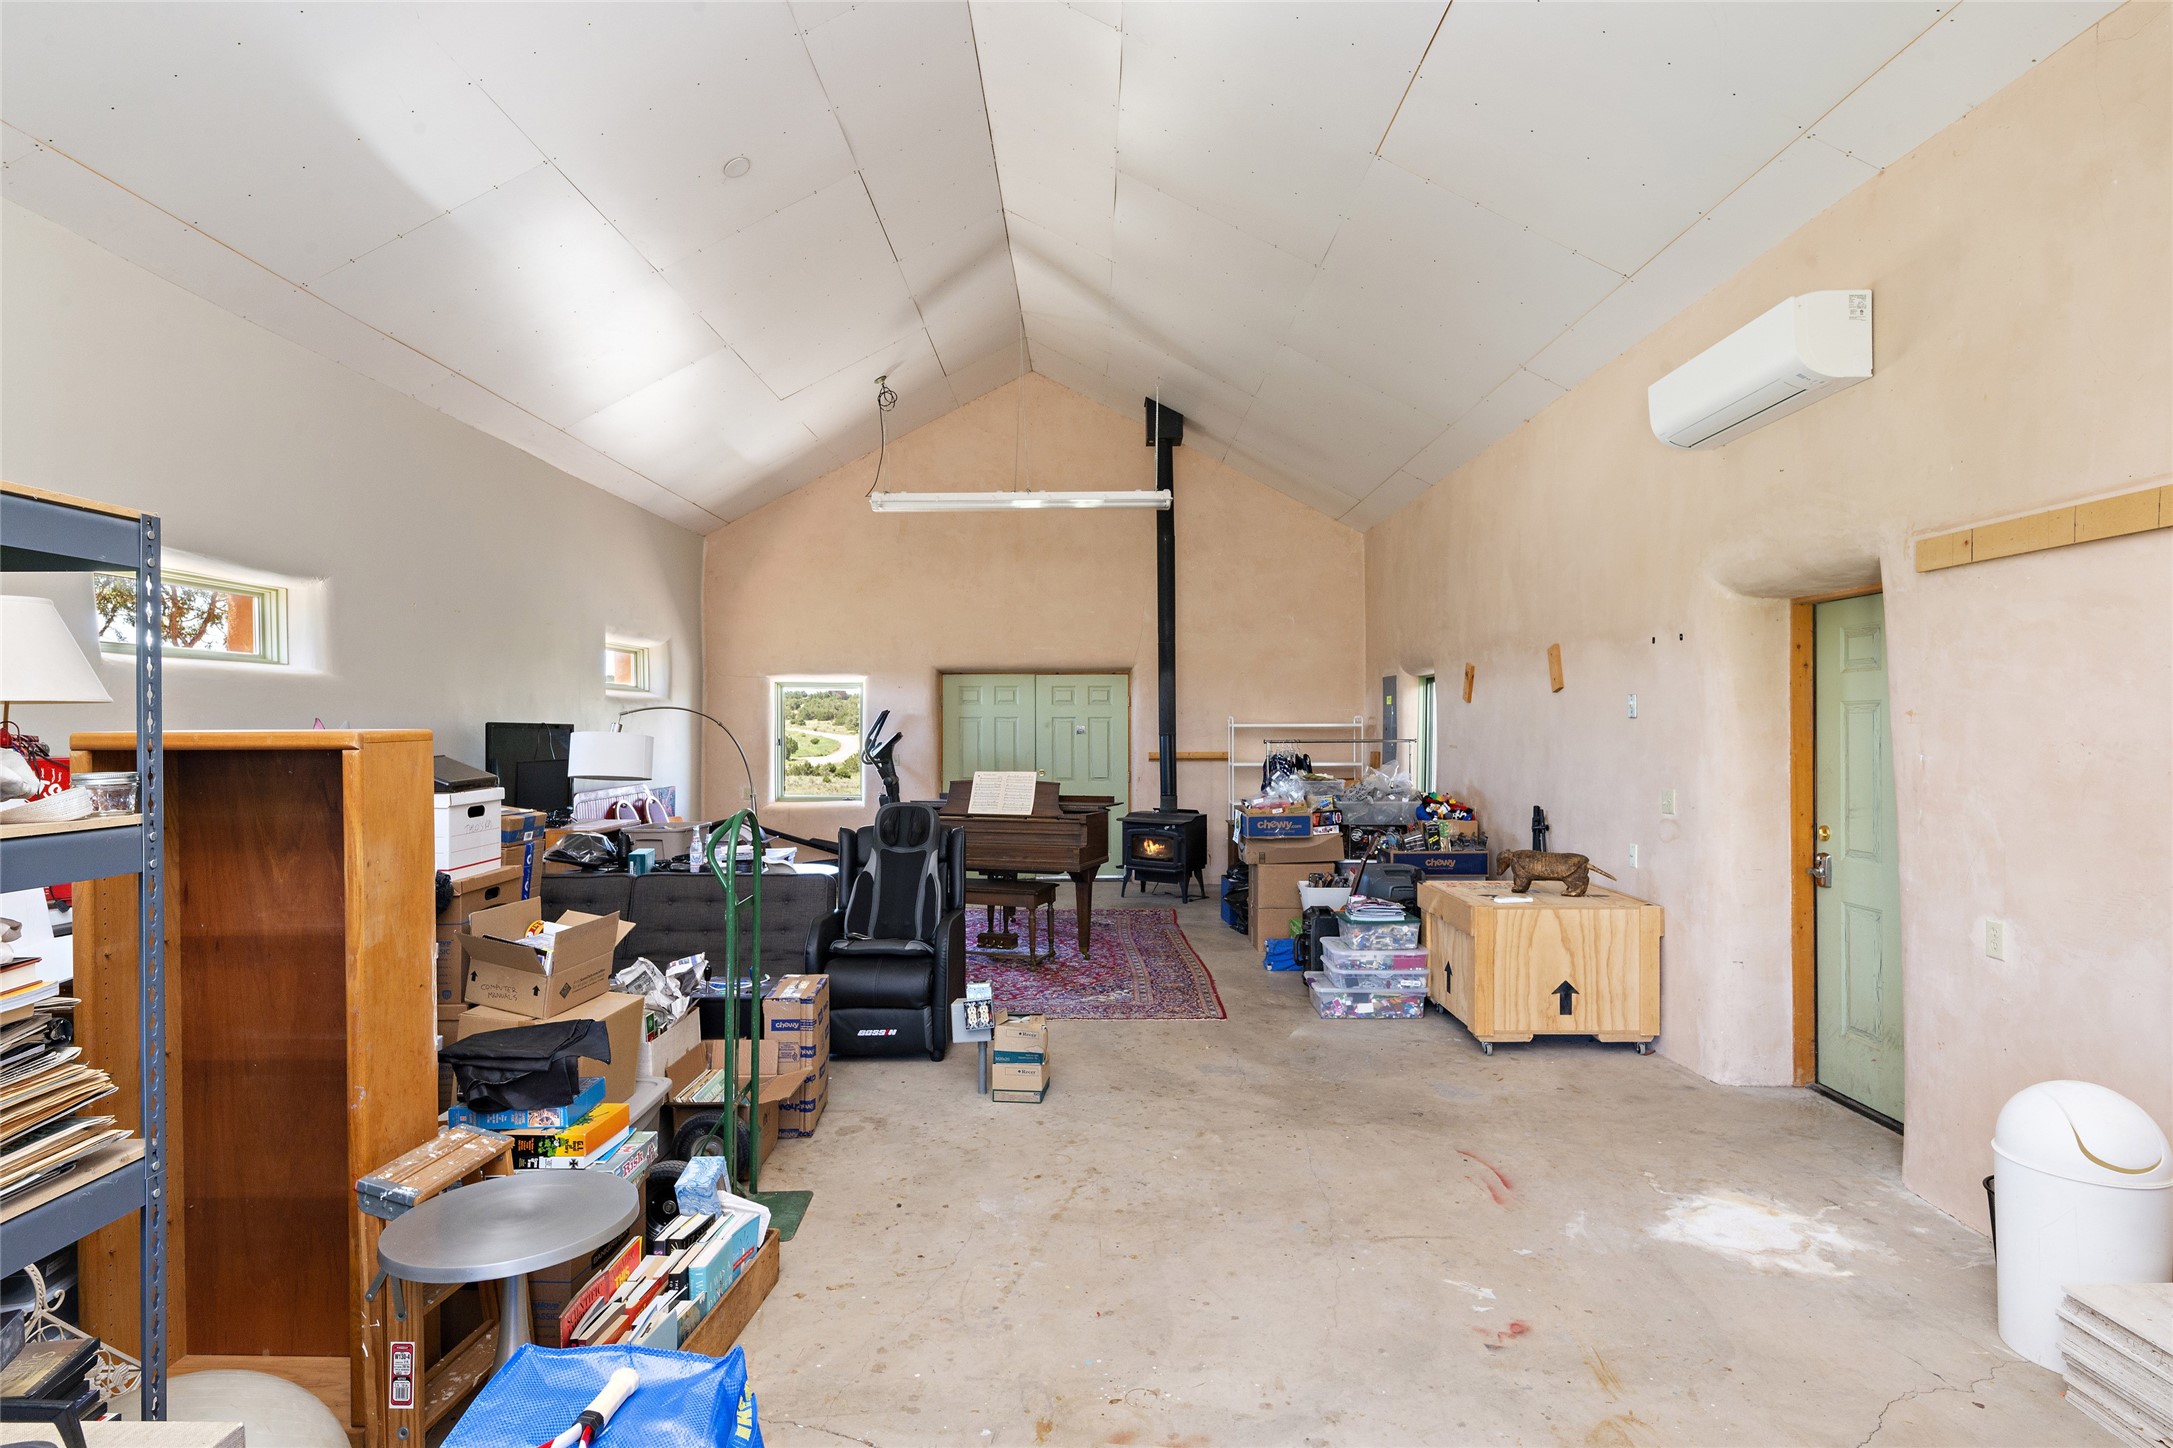 800 sq. ft. studio with high ceilings